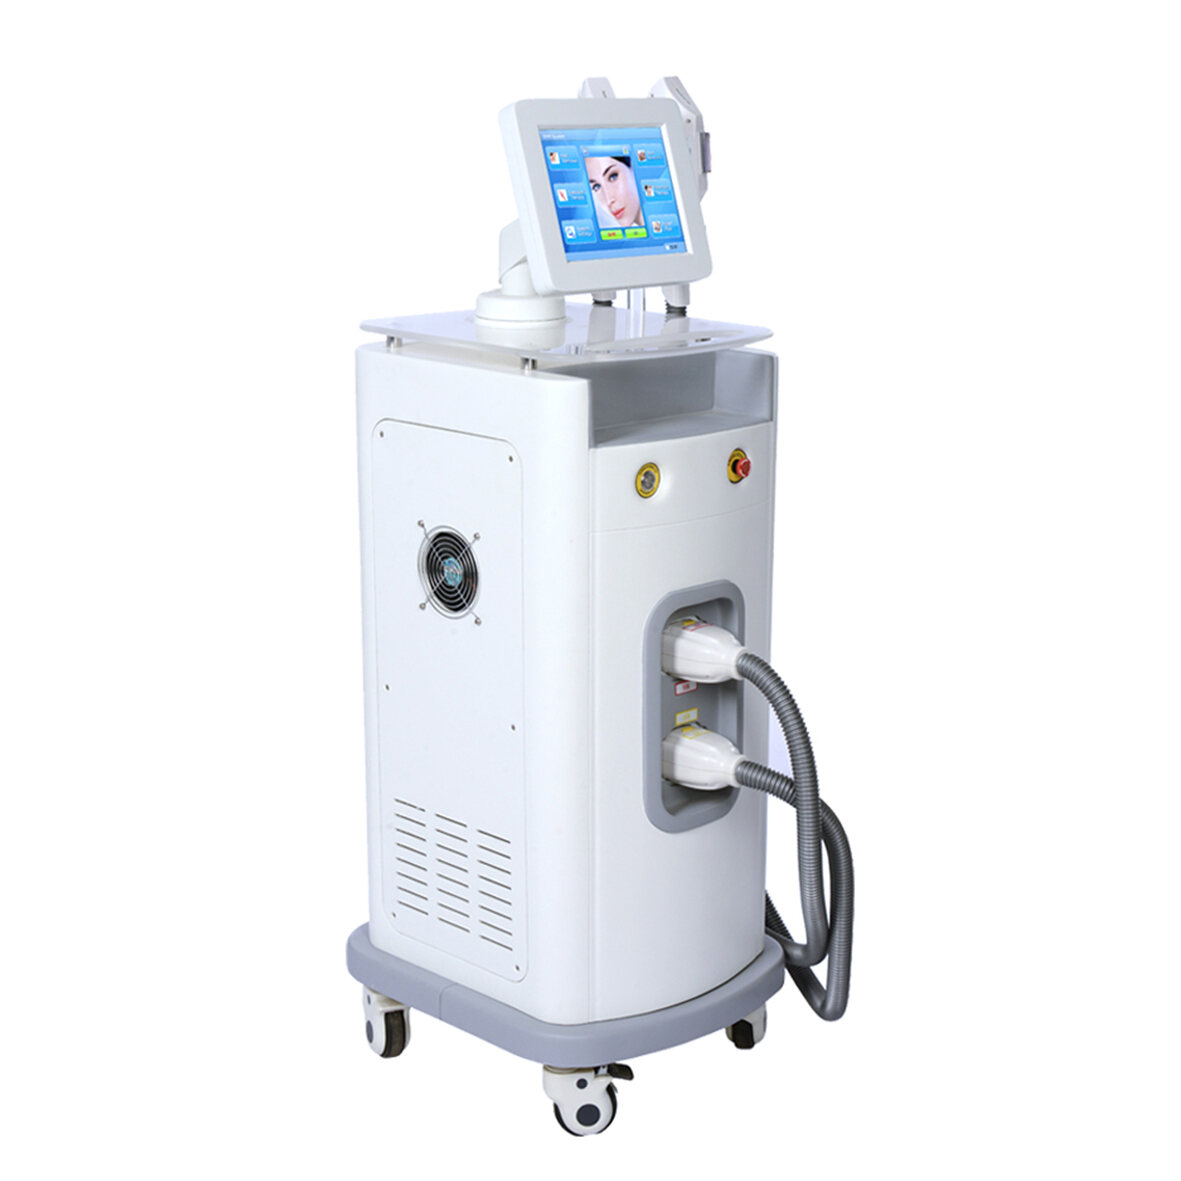 laser hair removal equipment